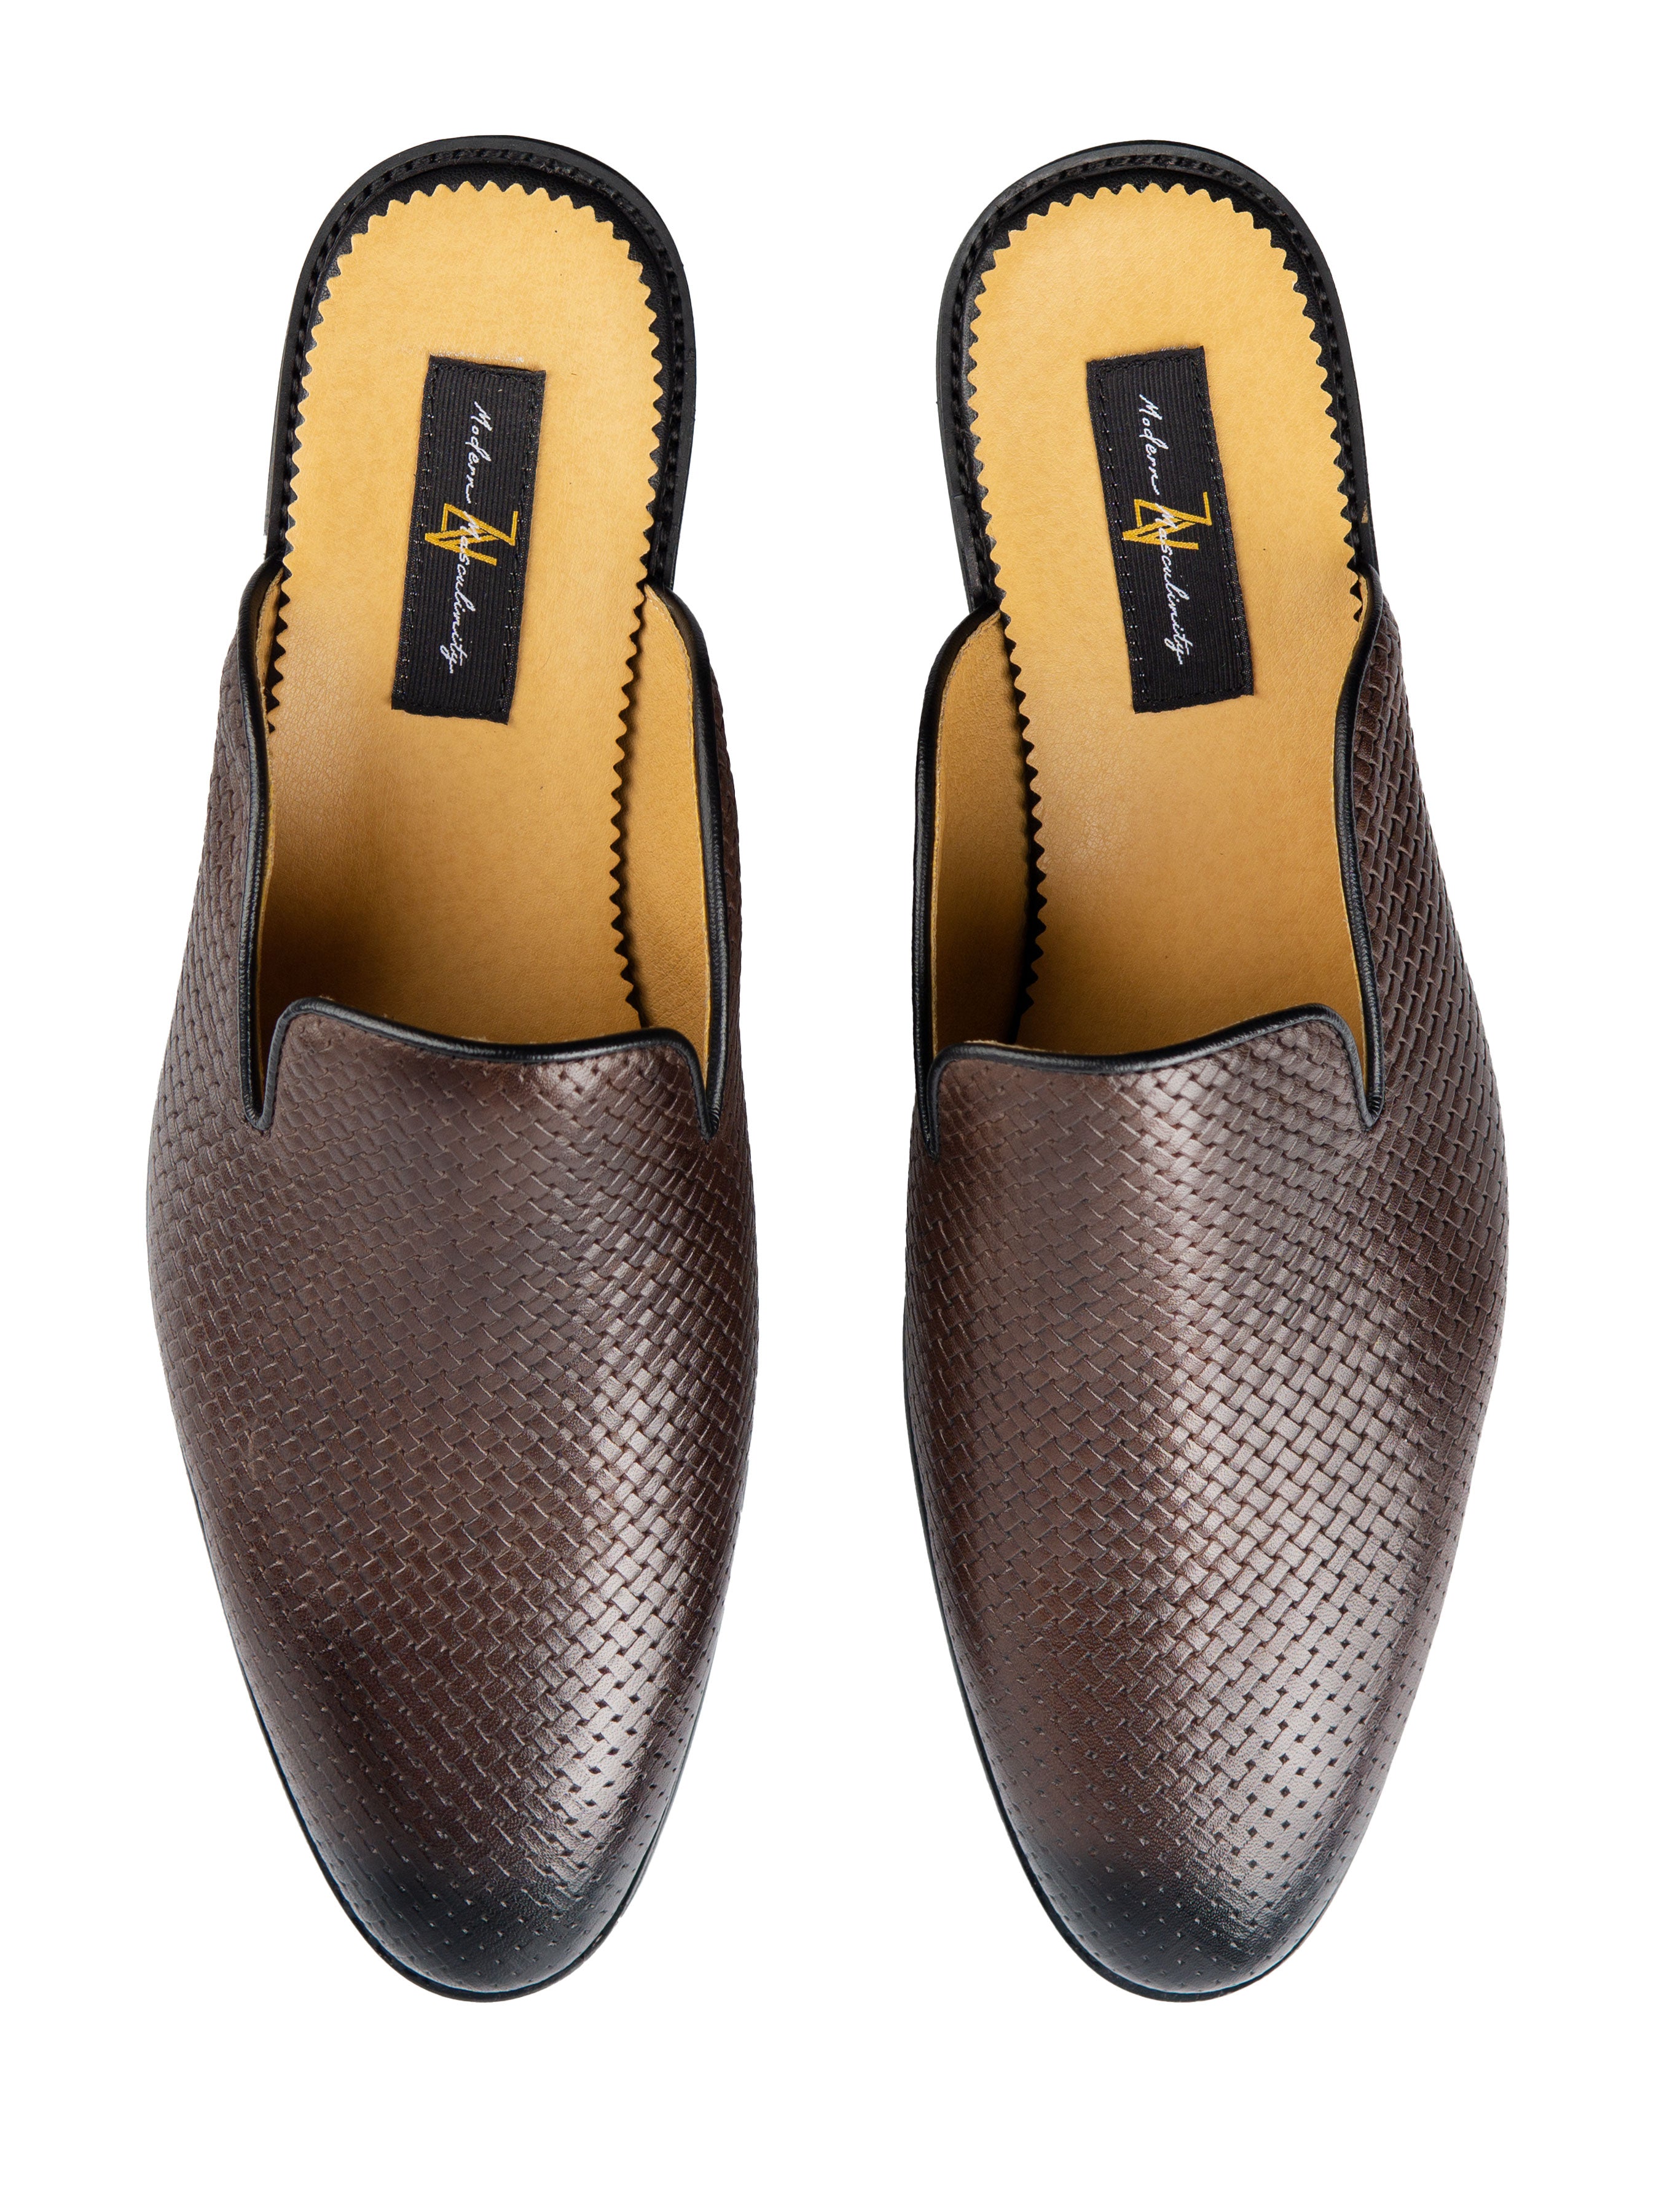 Mules - Dark Brown Woven Leather - Zeve Shoes